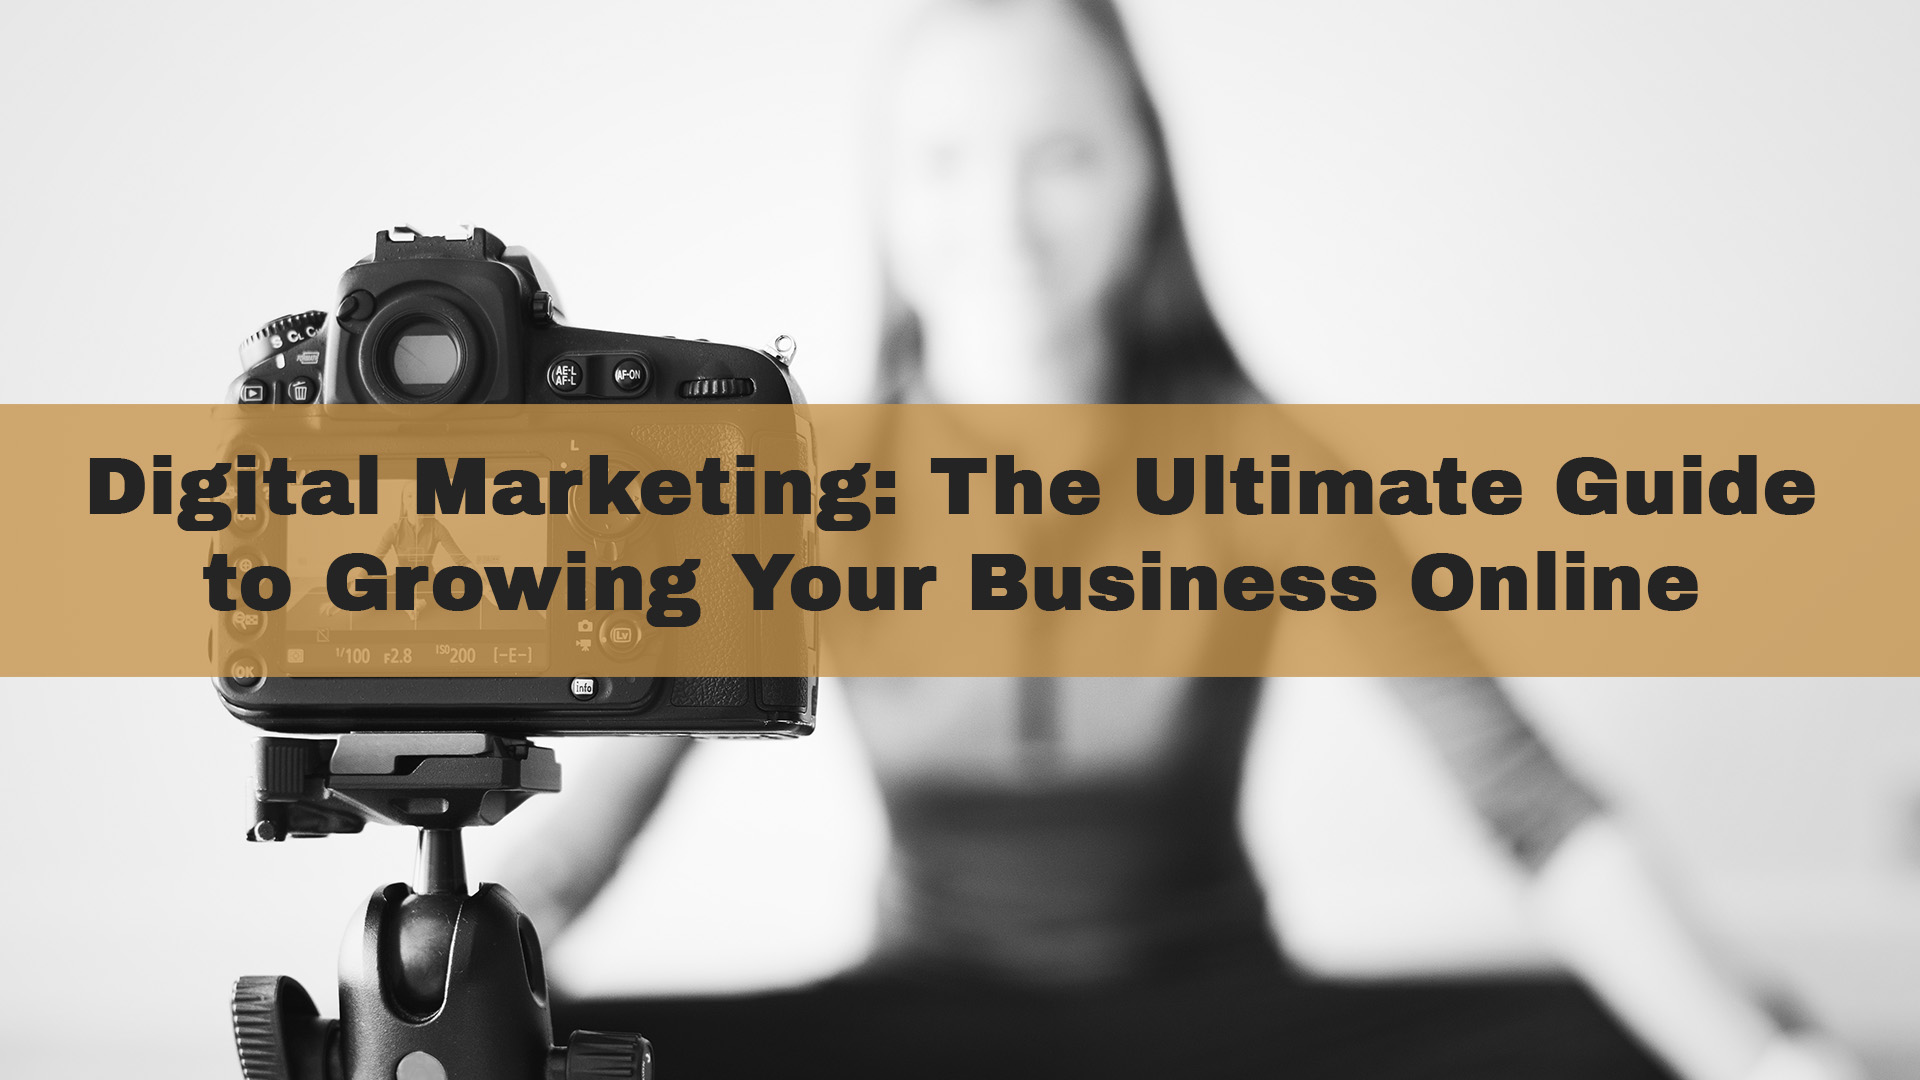 Digital Marketing The Ultimate Guide to Growing Your Business Online